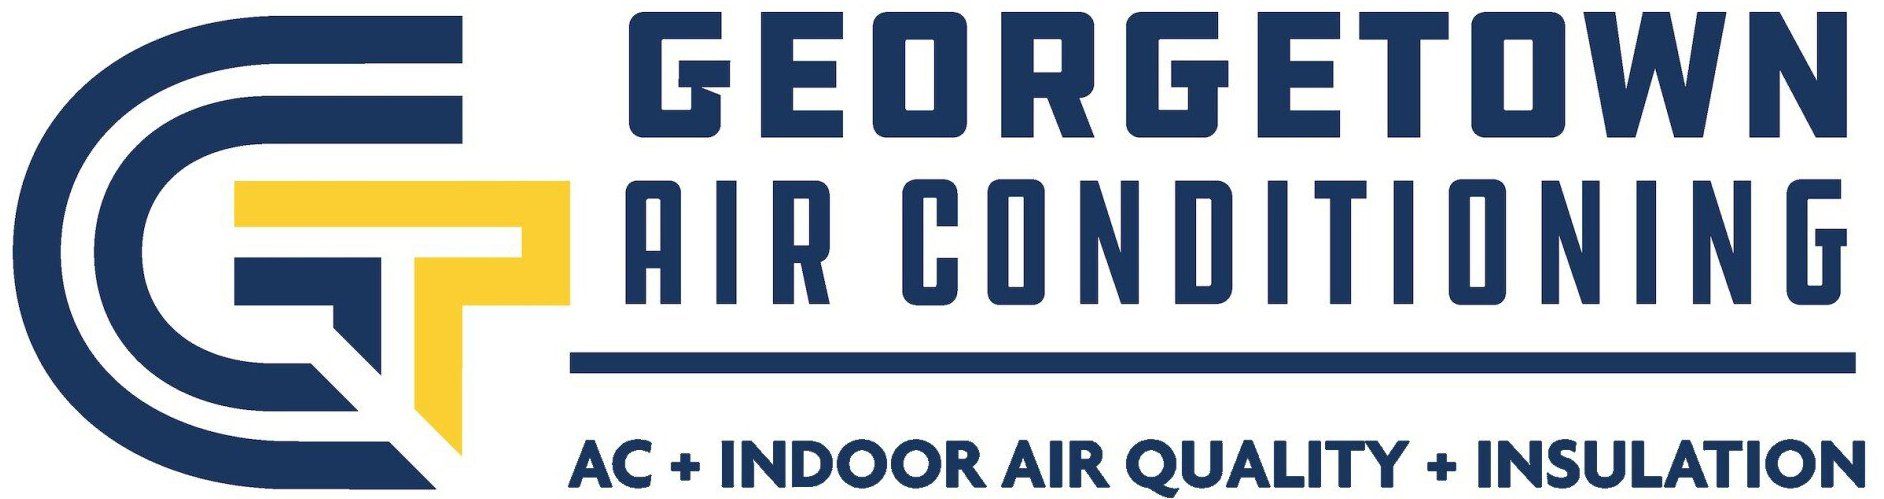 Georgetown Air Conditioning & Heating - LOGO